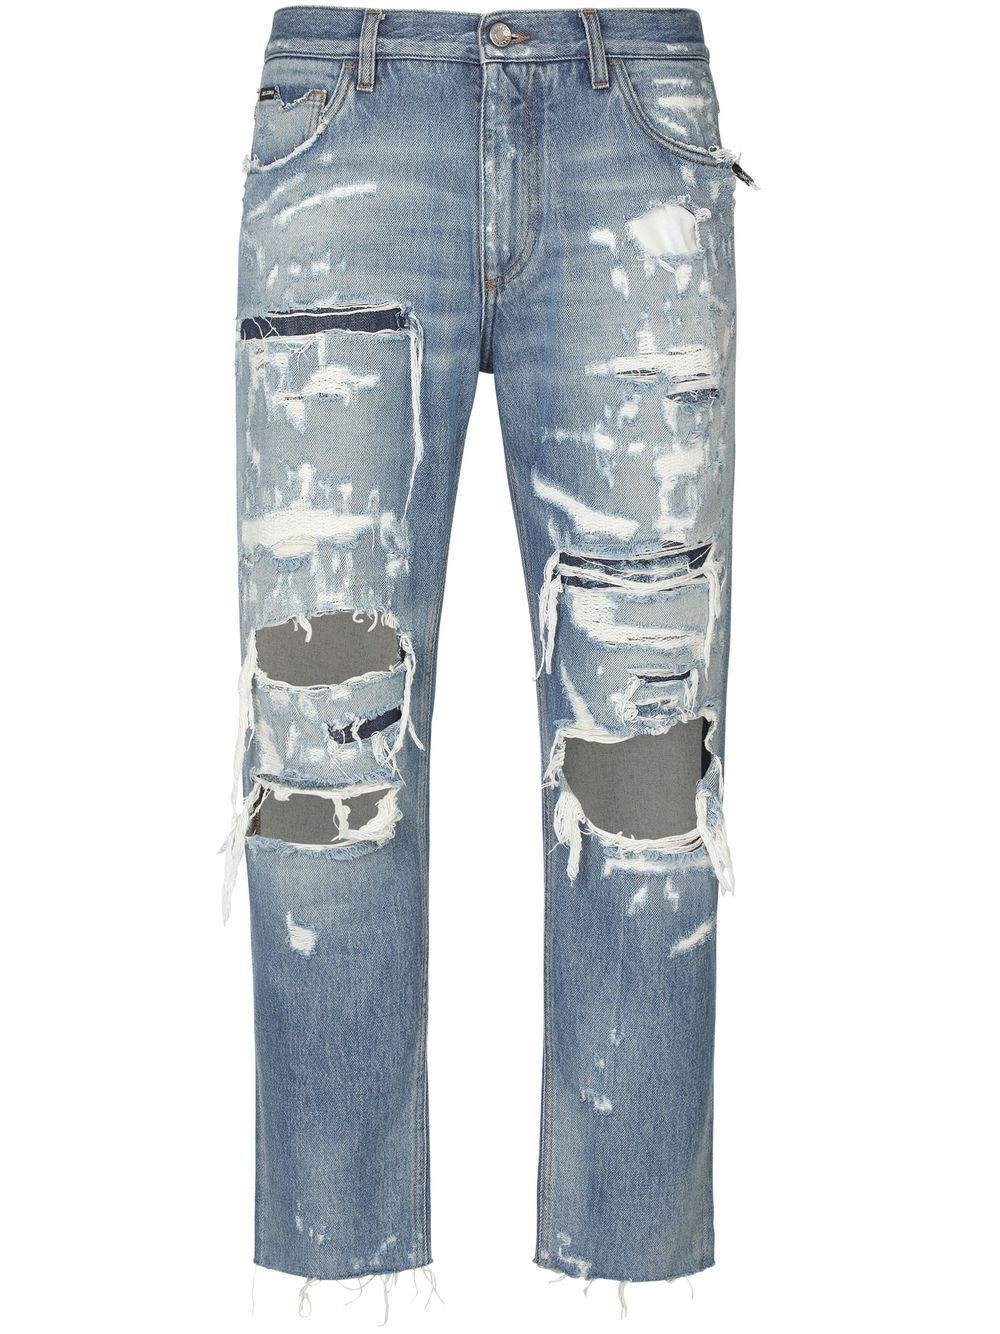 DOLCE & GABBANA RIPPED JEANS